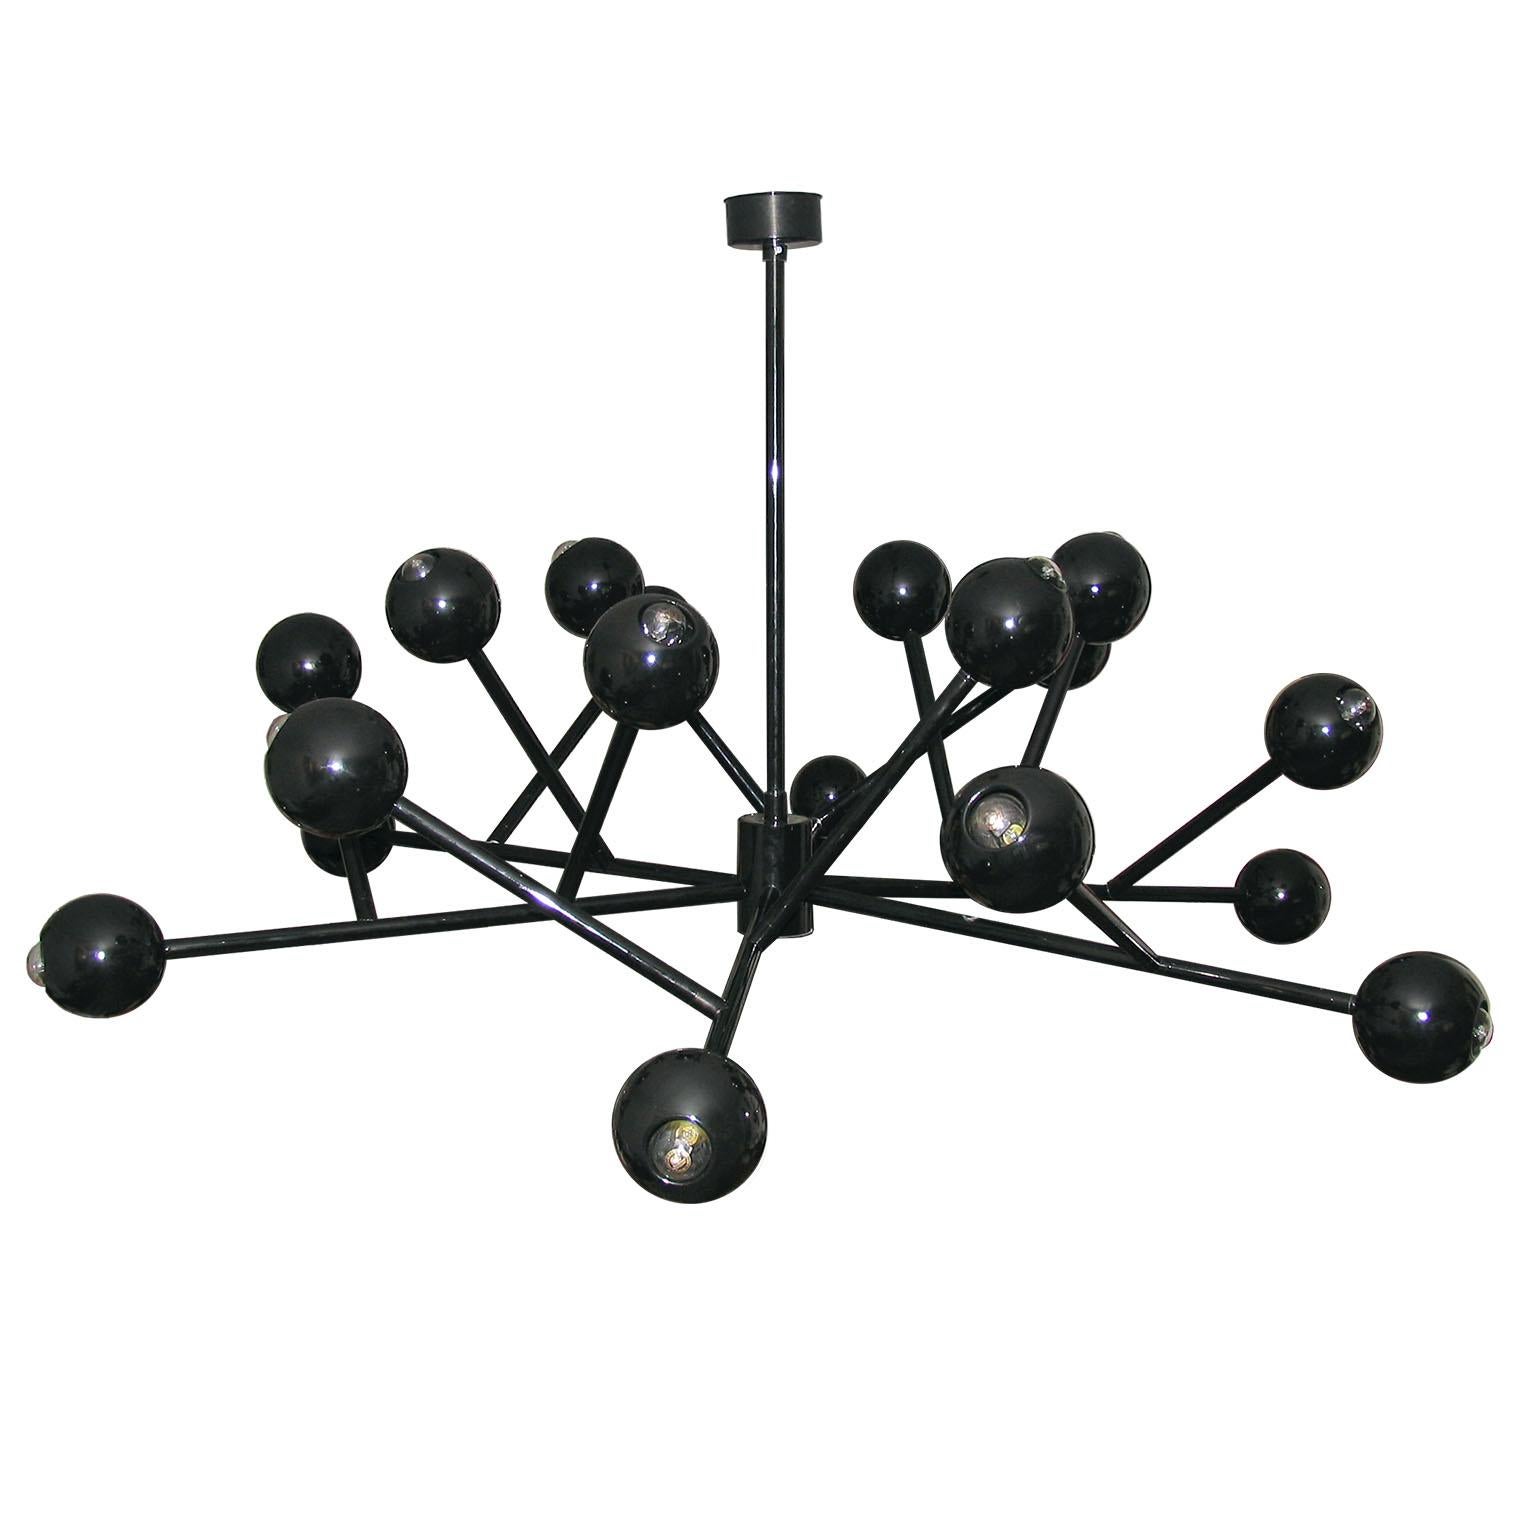 European Black Burst Chandelier Extra Large 59 in. High Glossy Finish For Sale